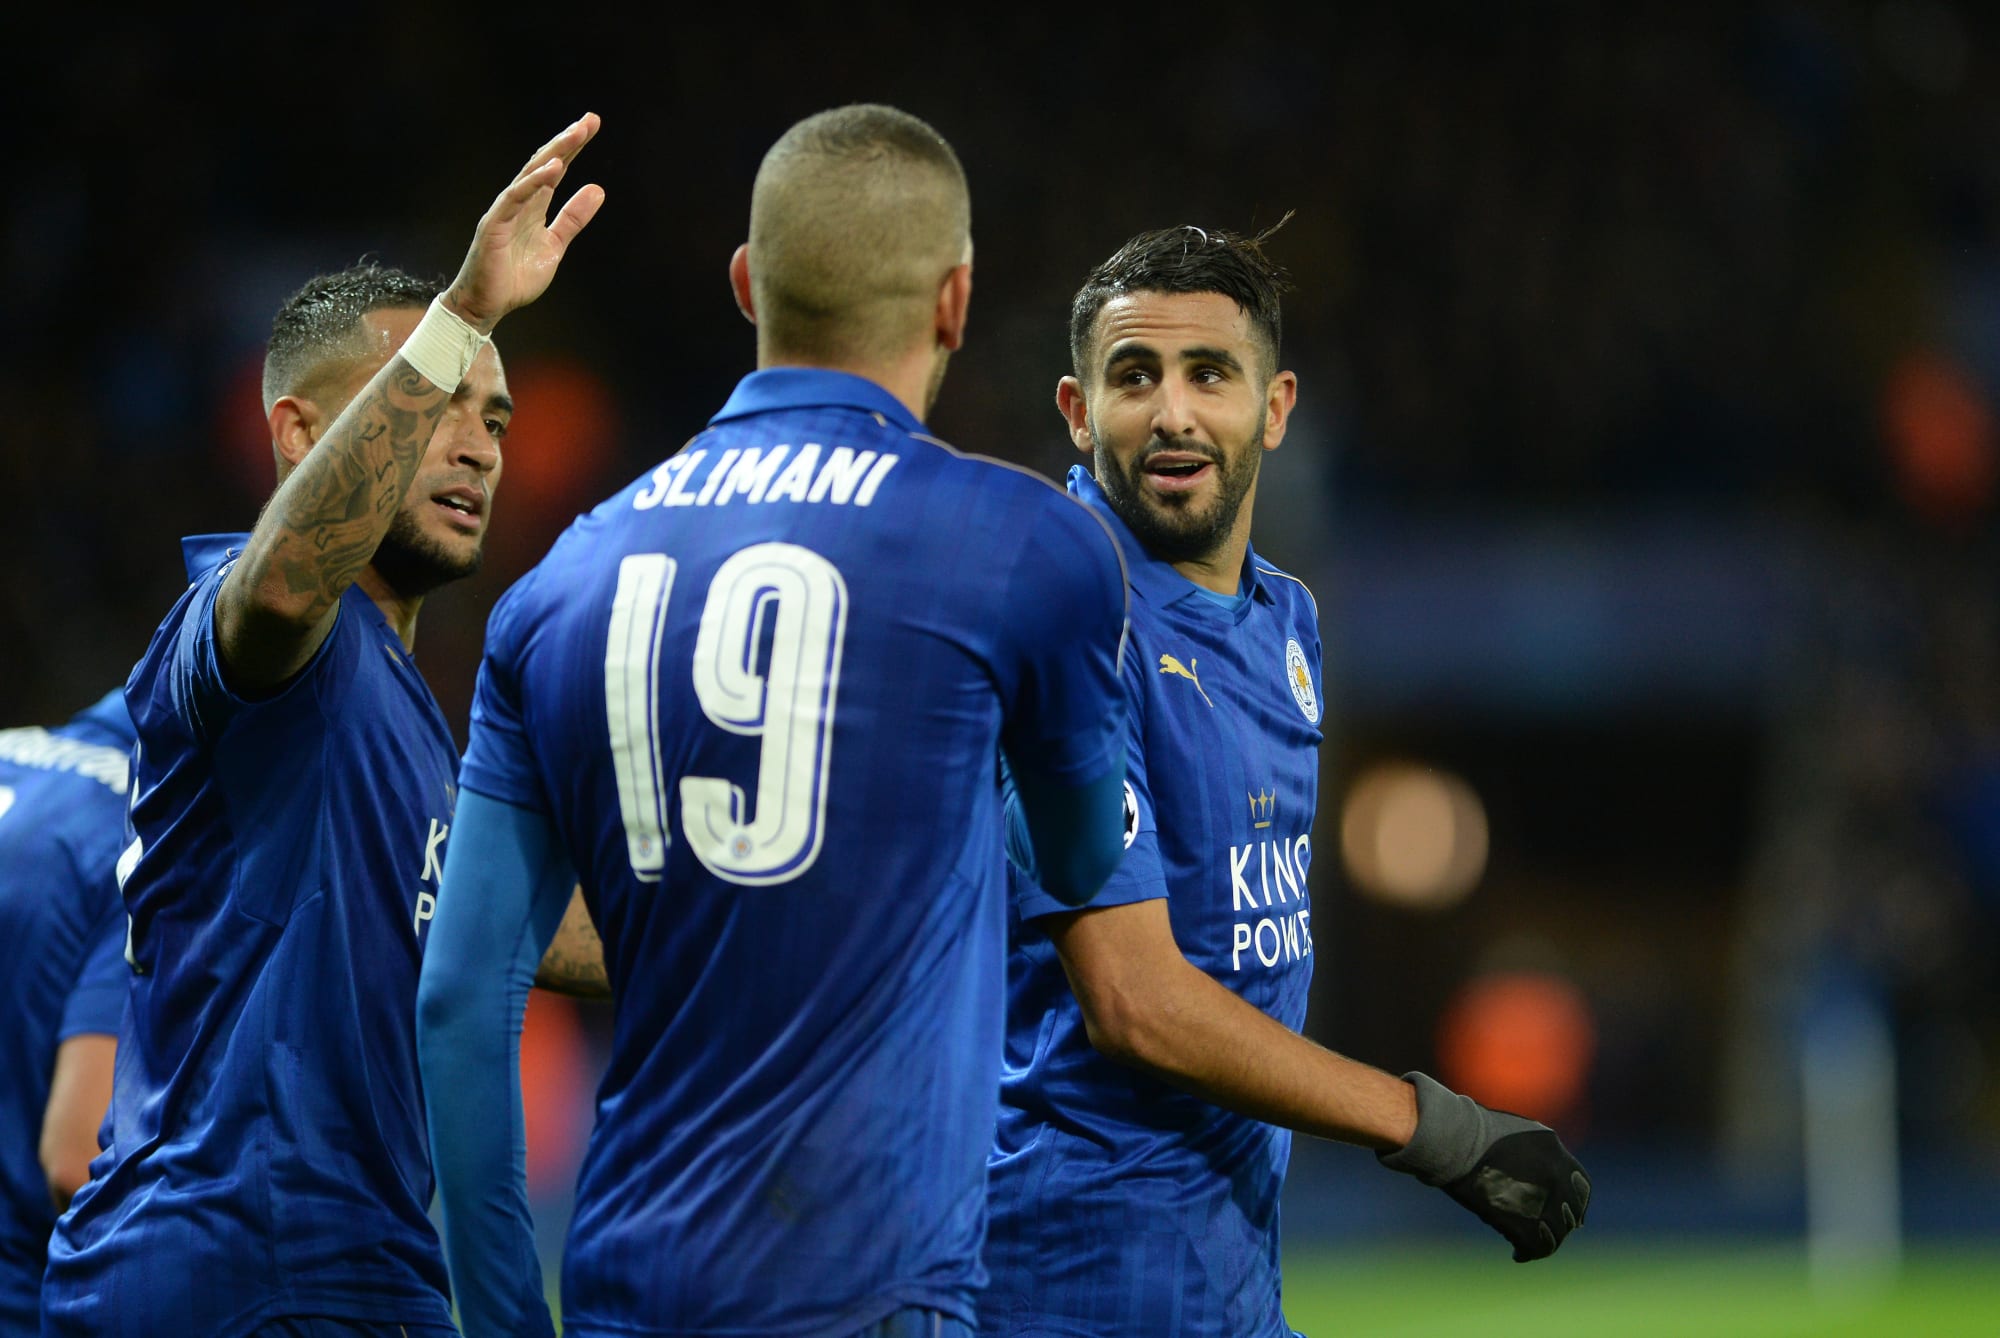 Leicester City on the brink of UCL last-16 after 1-0 win